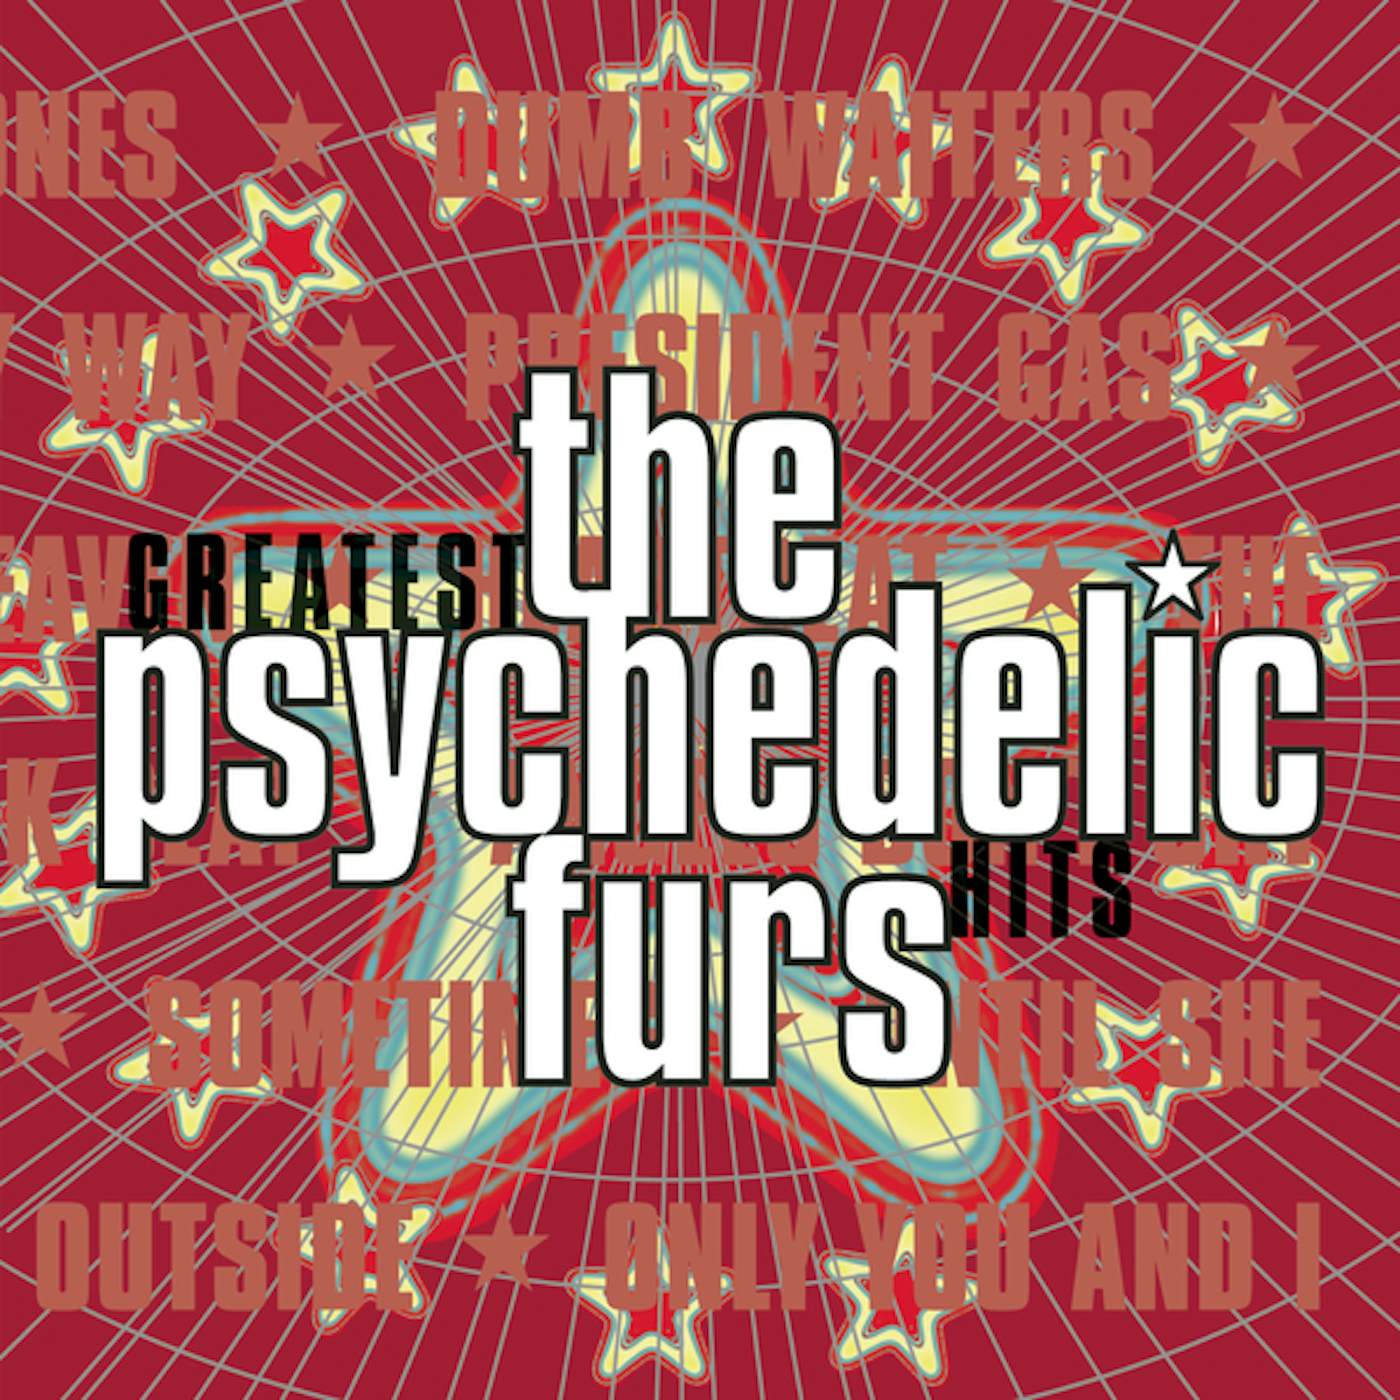 The Psychedelic Furs GREATEST HITS CD